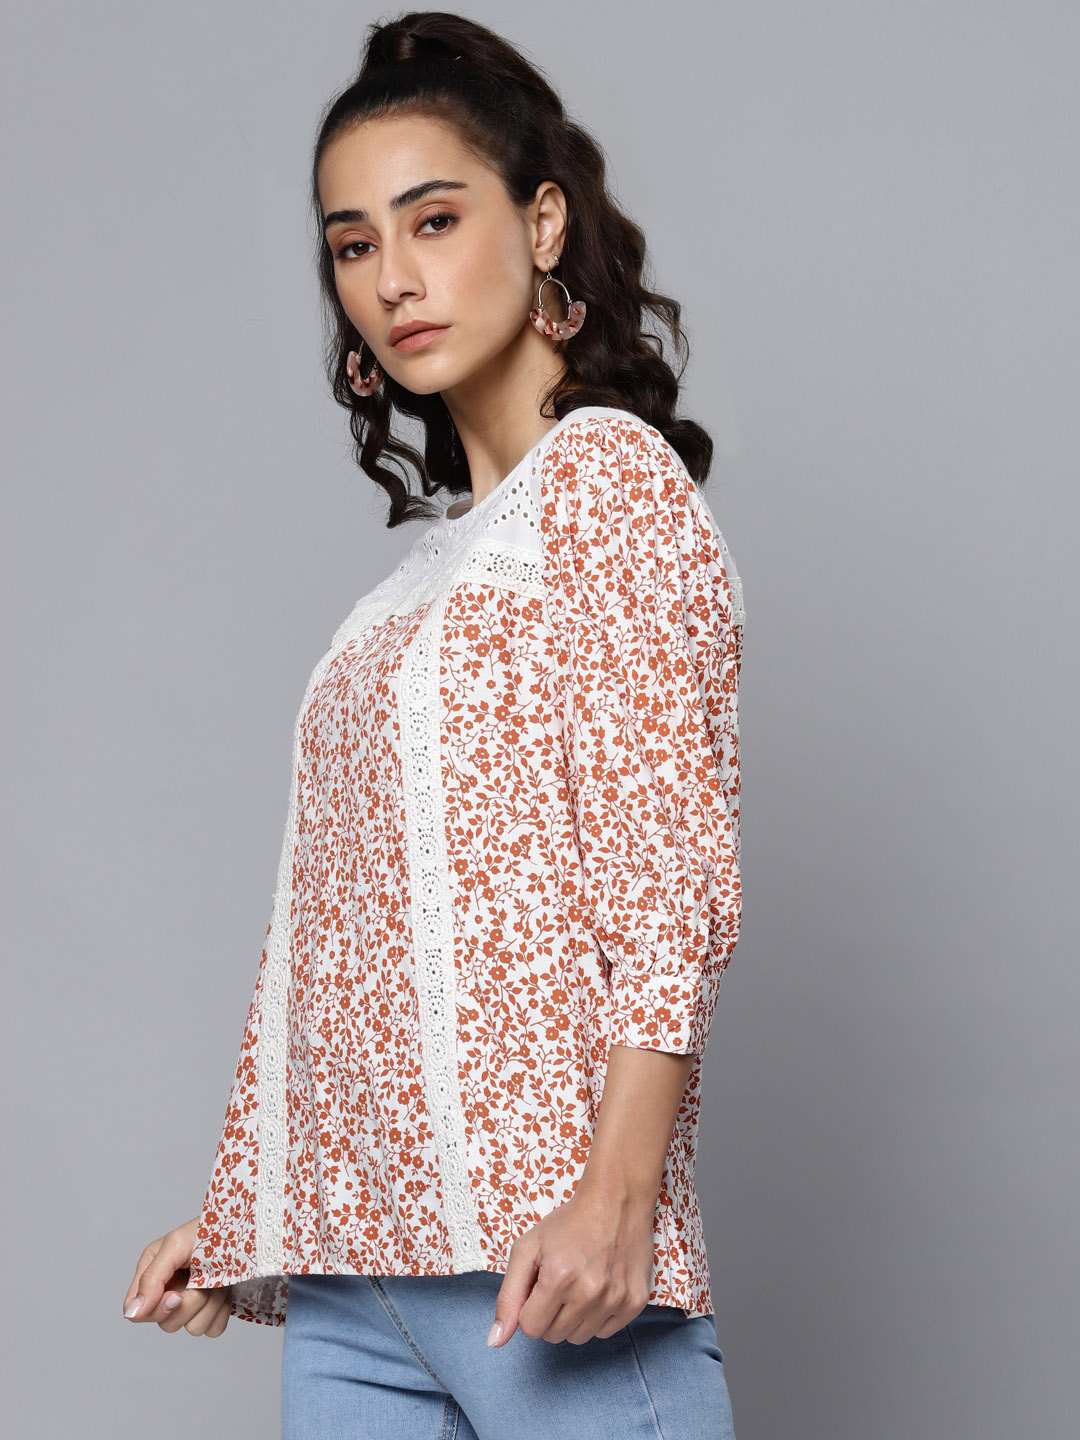 Printed Top with Lace Detail & Schiffli Yoke